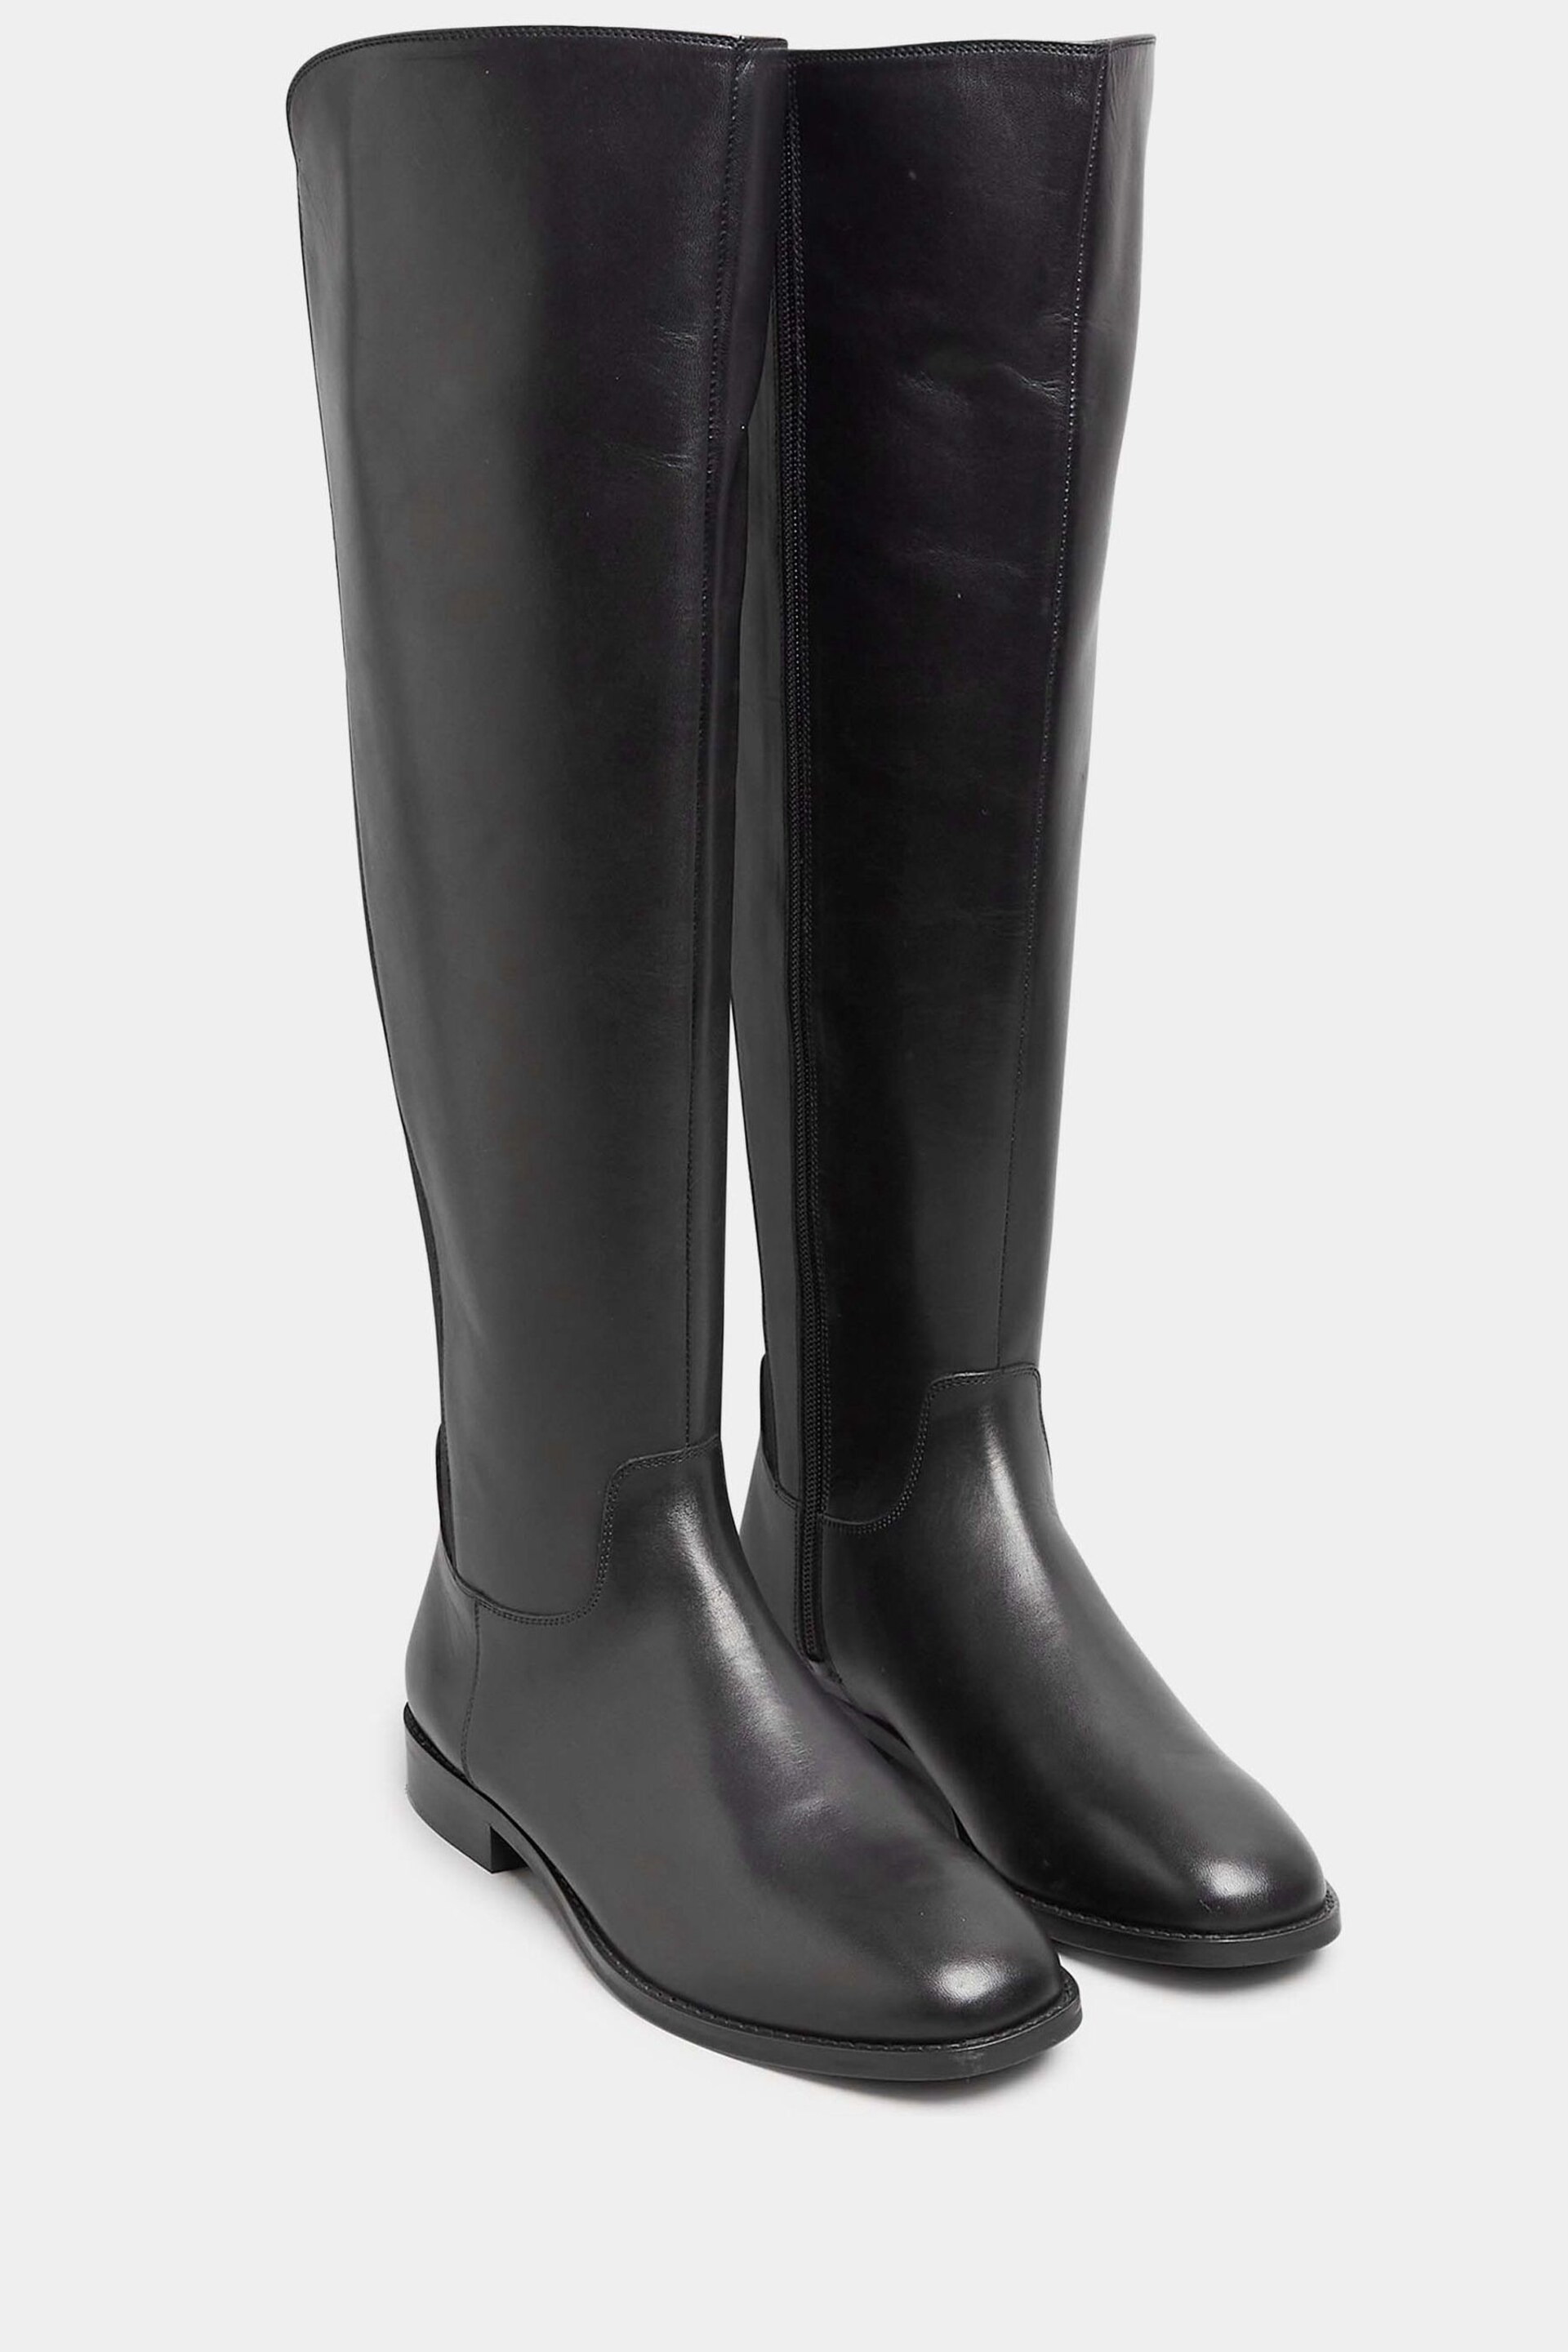 Long Tall Sally Black Leather Knee High Boots - Image 3 of 5